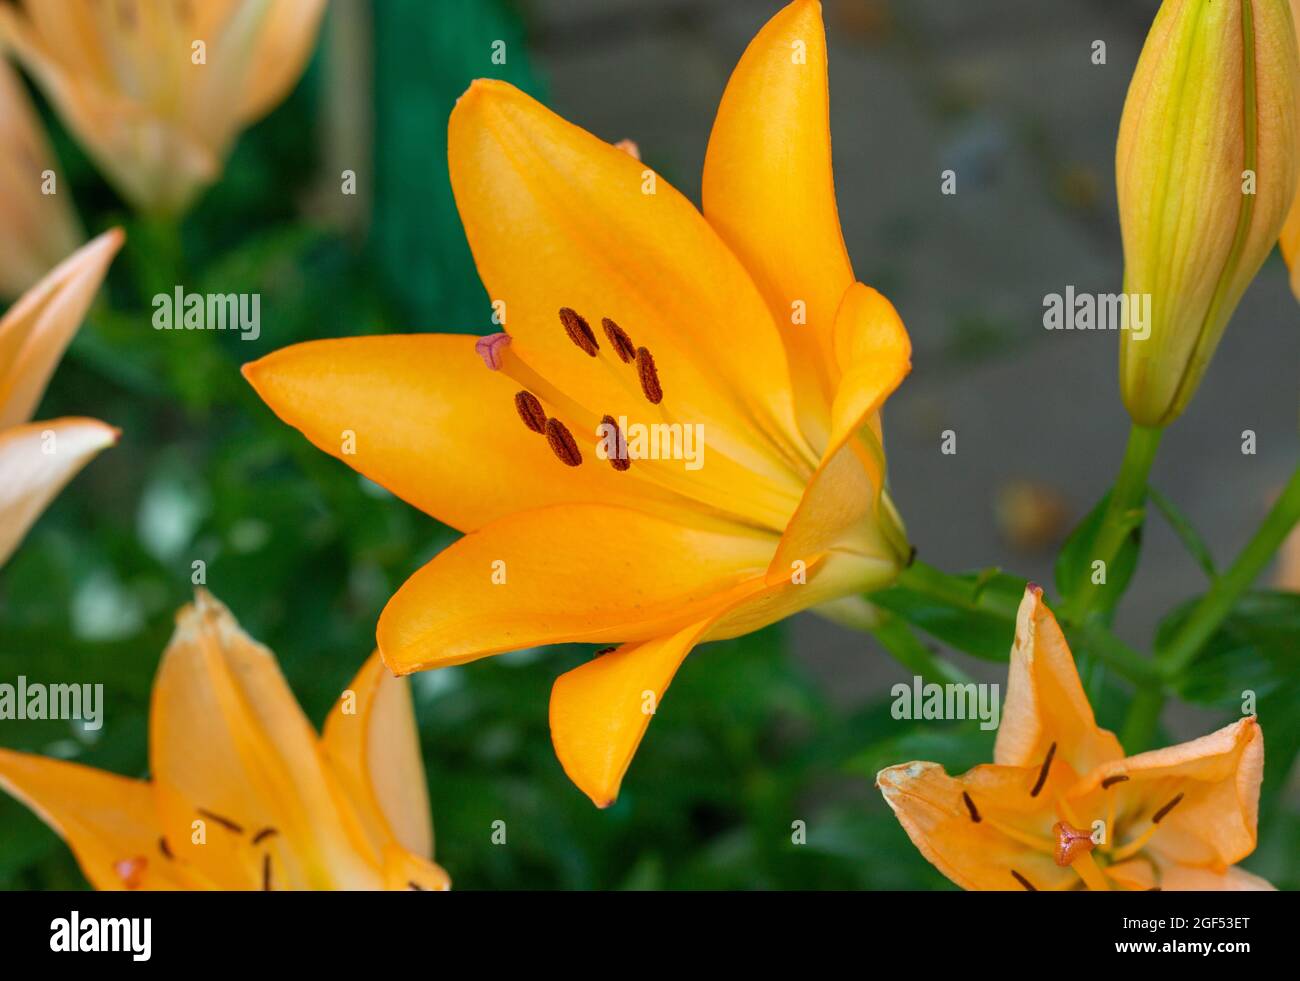 Close up of Yellow lily flower. Hemerocallis also called Lemon Lily, Yellow Daylily, Hemerocallis flava. Yellow lily flower, known as Lilium parryi, b Stock Photo